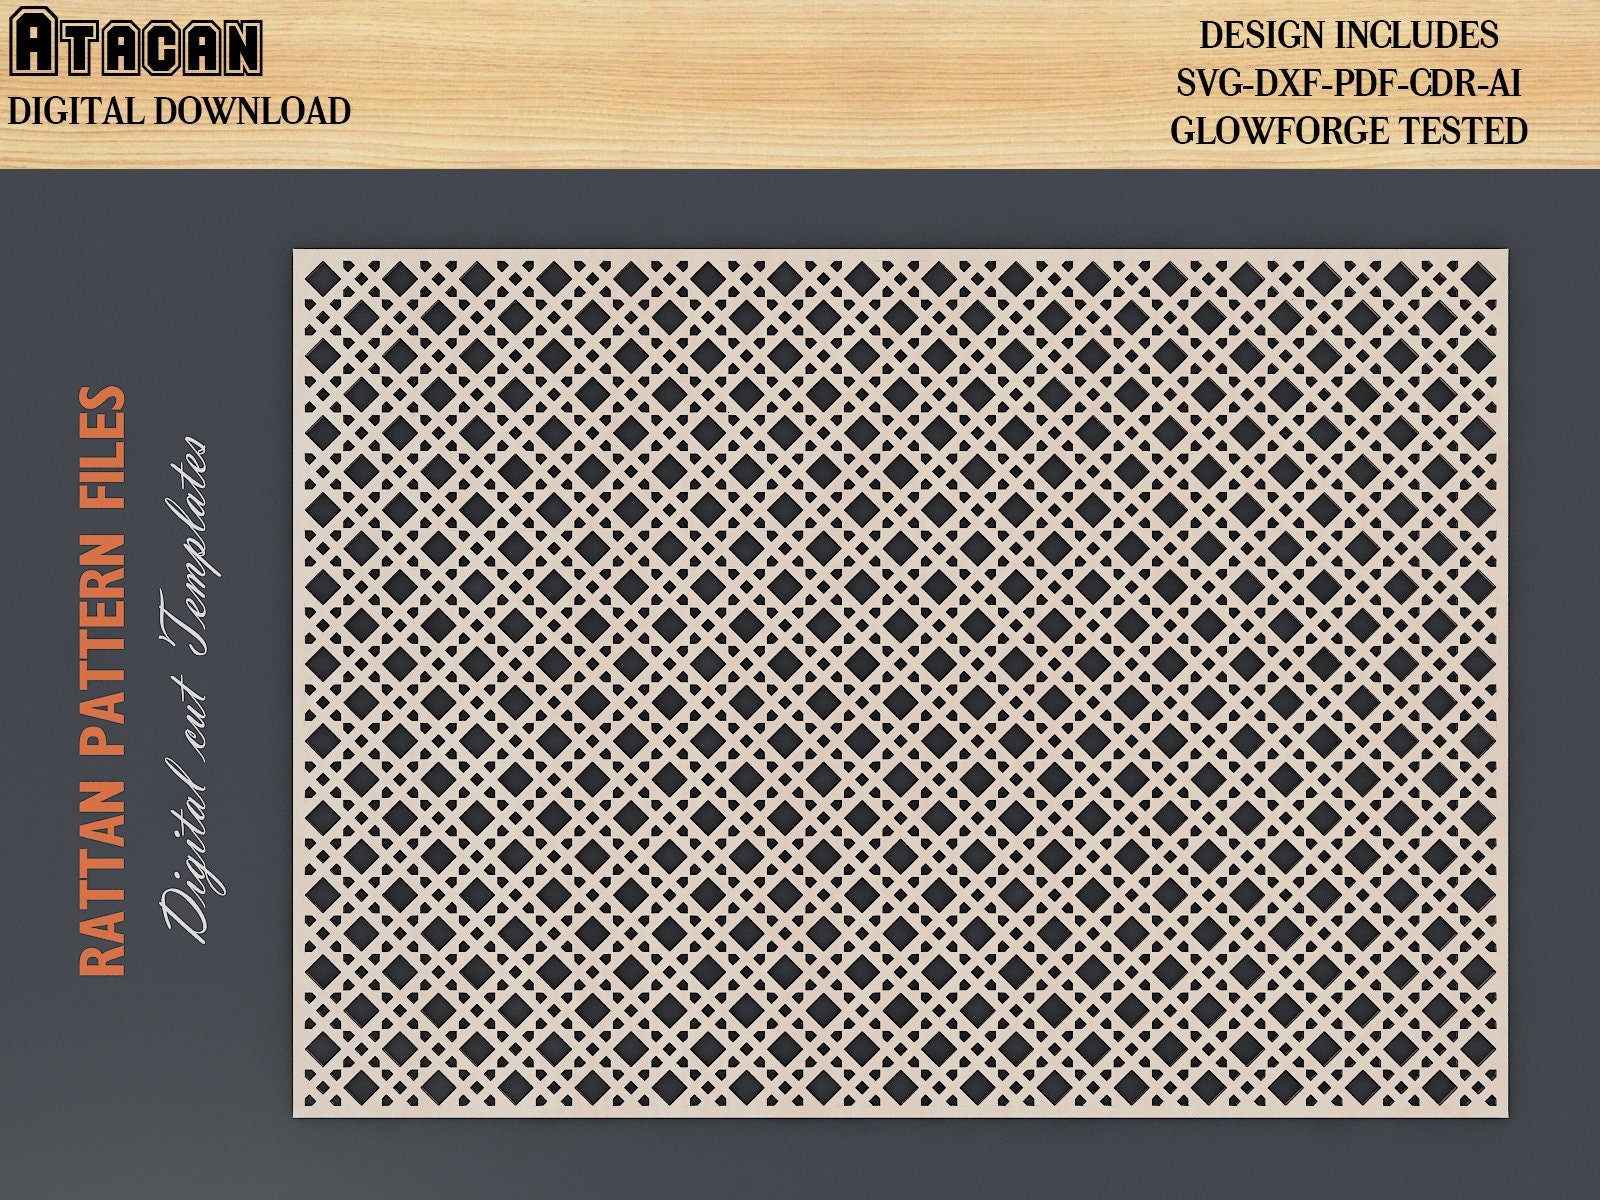 Rattan Cane Weaving Pattern Digital Templates SVG DXF Files Base Foundation Download Laser Cutting GlowForge Silhouette 394